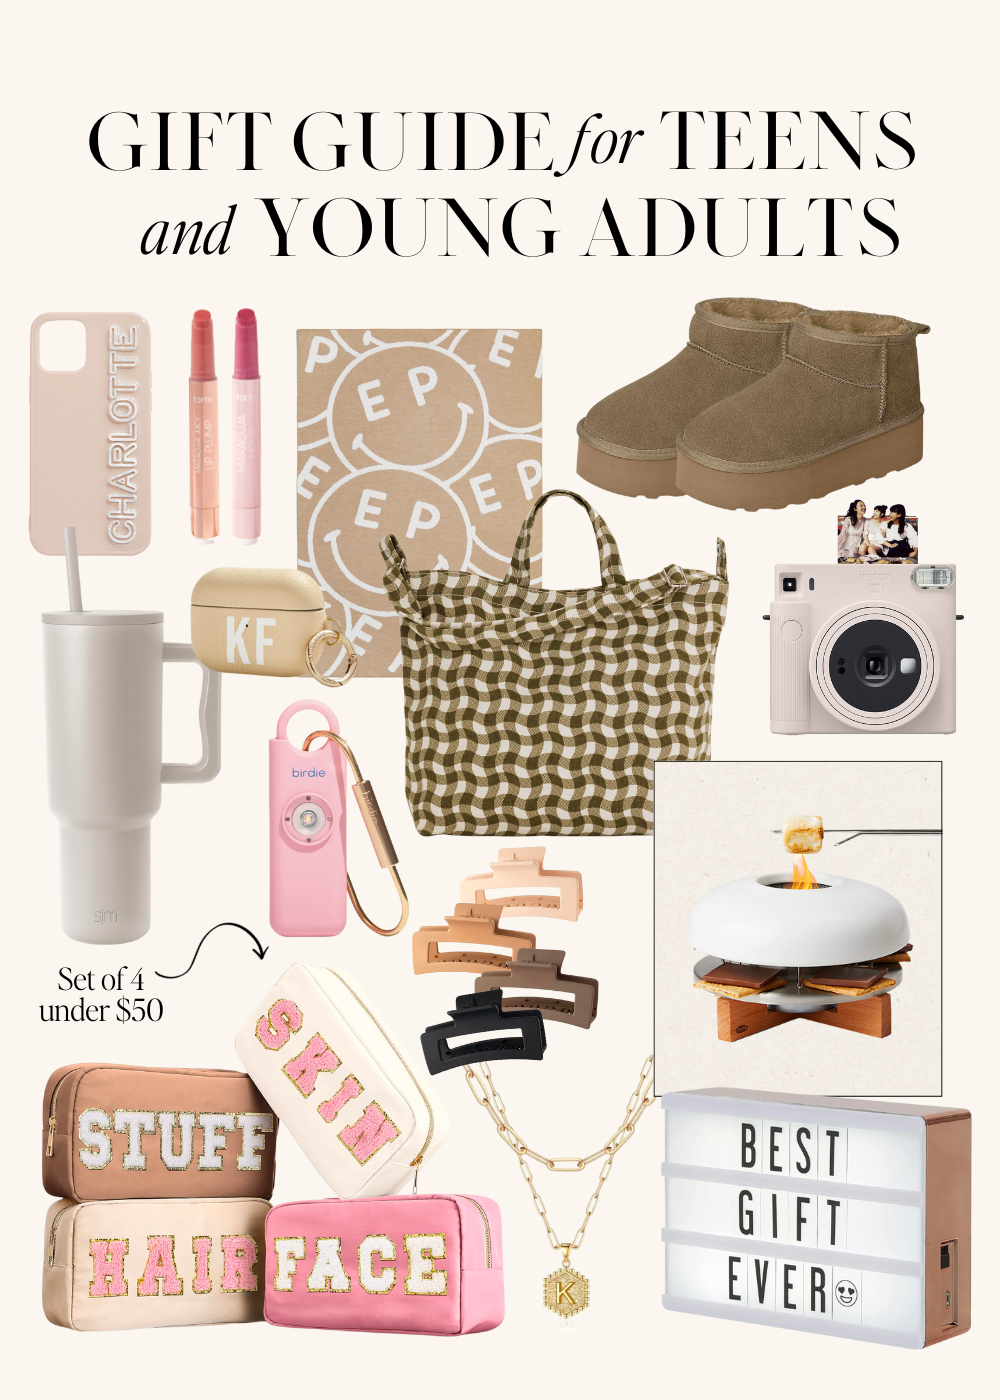 Shop holiday: Gifts for young professionals